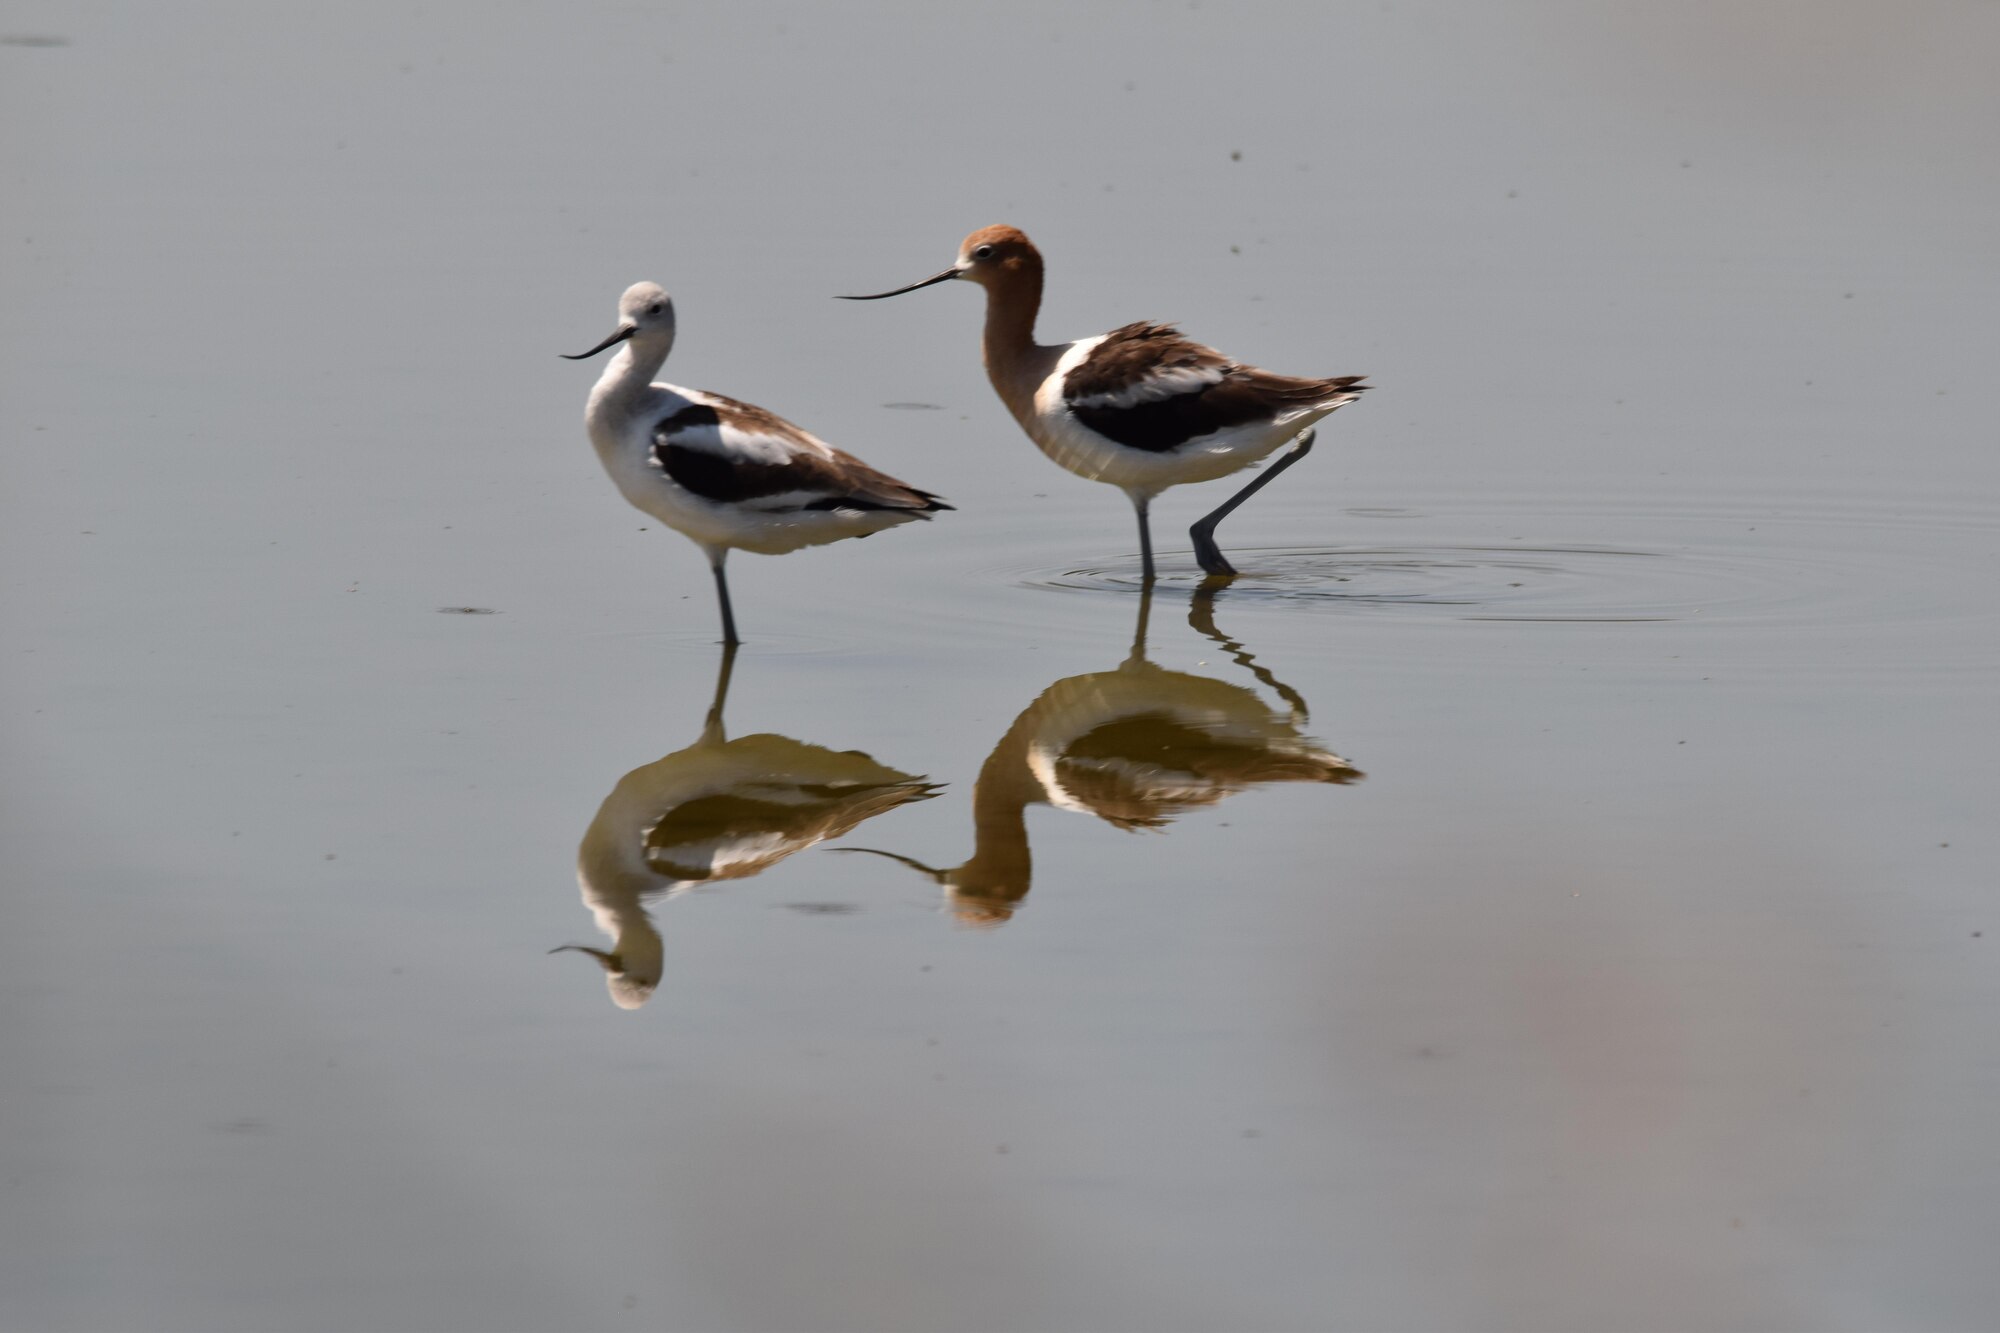 A pair of American Avocets cool their feet in the water at Piute Ponds. In addition to dozens of species of birds, the wetlands are home to foxes, coyotes, bobcats and a range of other desert fauna. (U.S. Air Force photo by Christopher Ball)